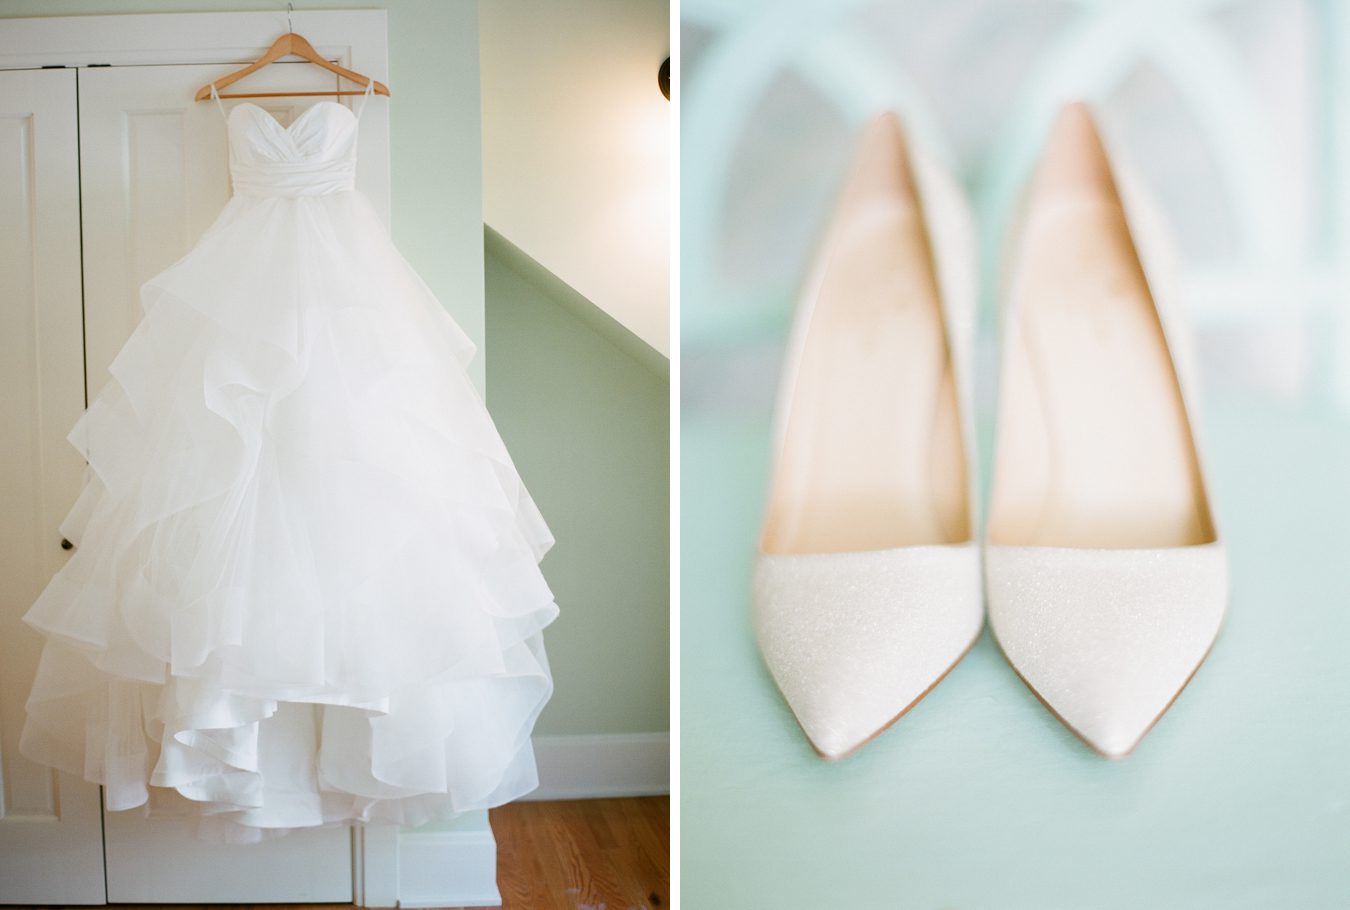 detail shots of a bride's gown and shoes